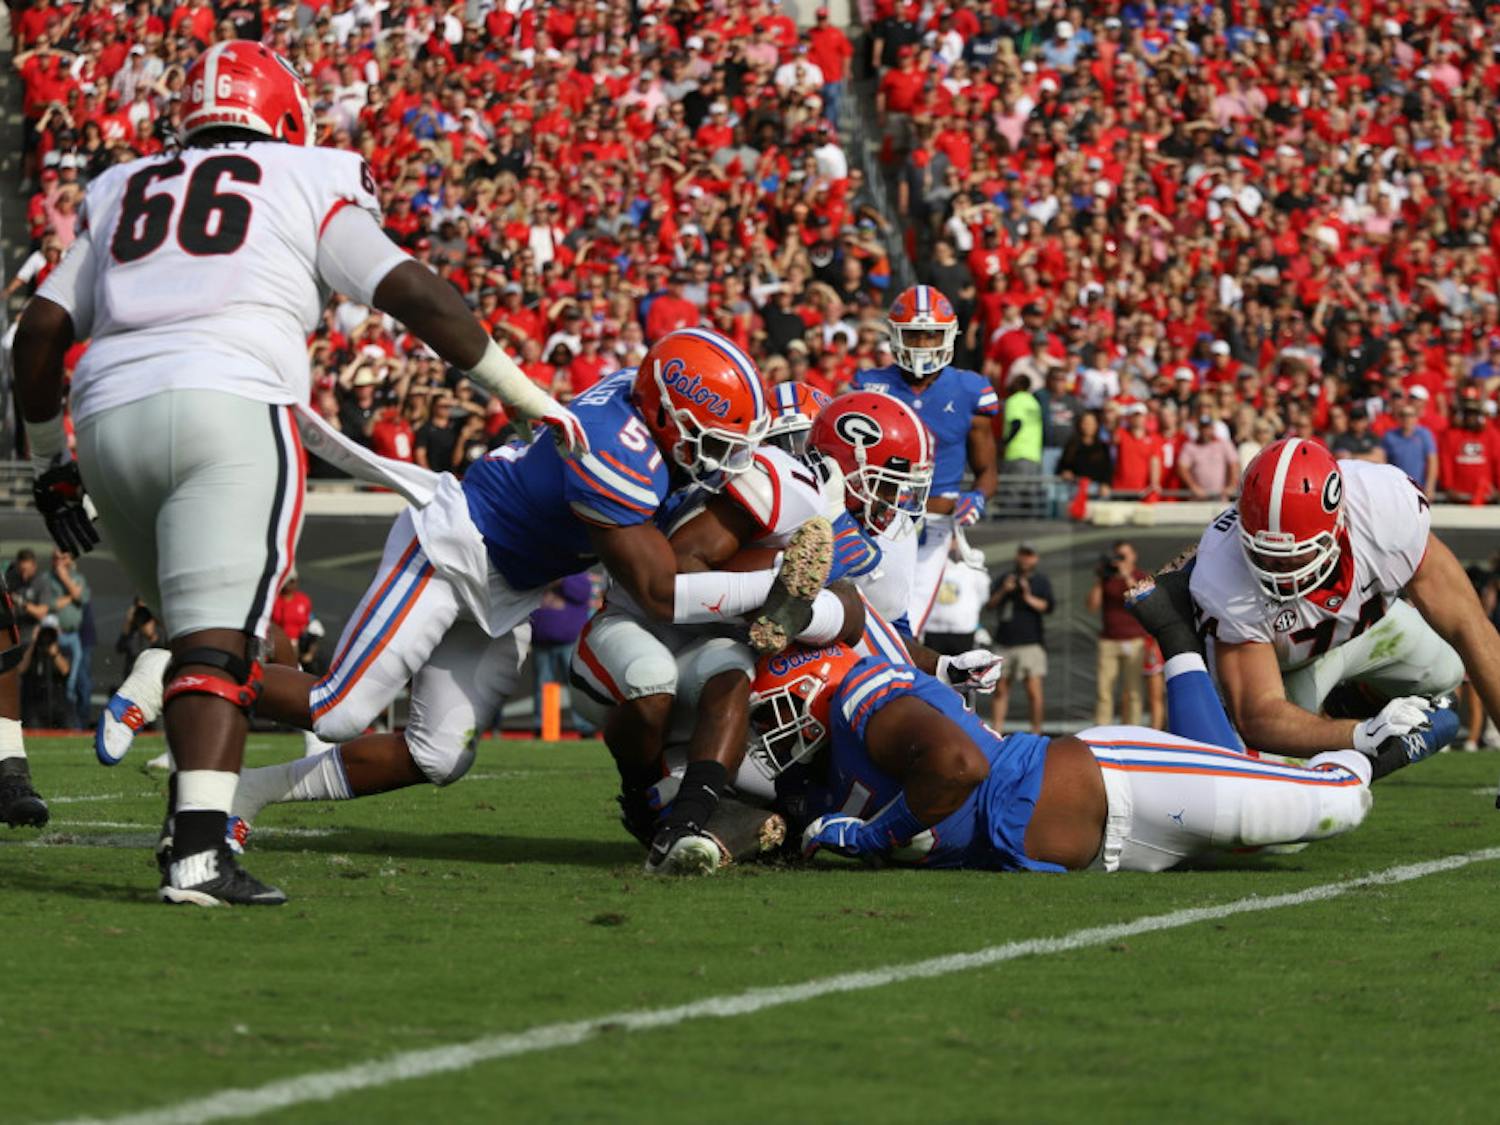 Linebacker Ventrell Miller and his teammates tackle a Georgia ball carrier Nov. 7, 2020. Miller returns to UF this season after tearing his bicep last year.